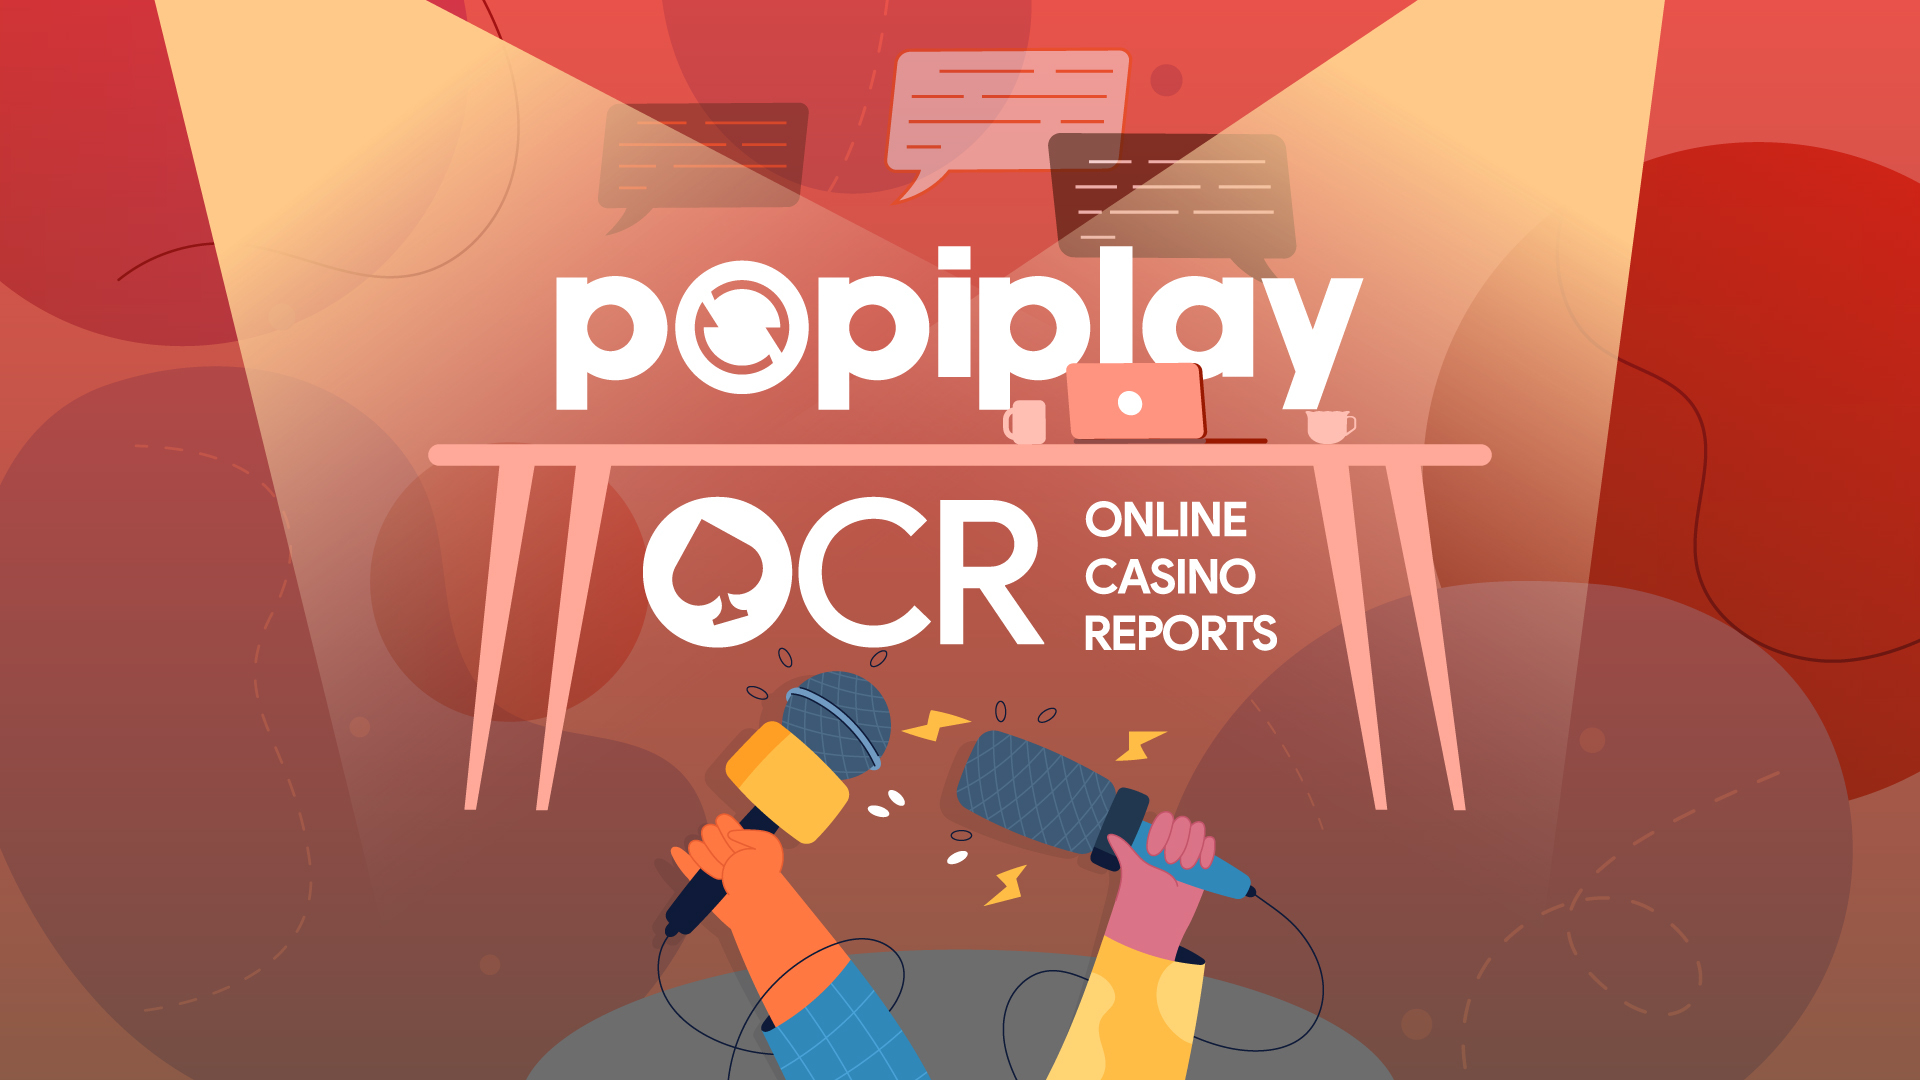 OCR-Talks-to-Alexandra-Popiplays-Marketing-Manager-in-an-Exclusive-Interview-header-1.jpg